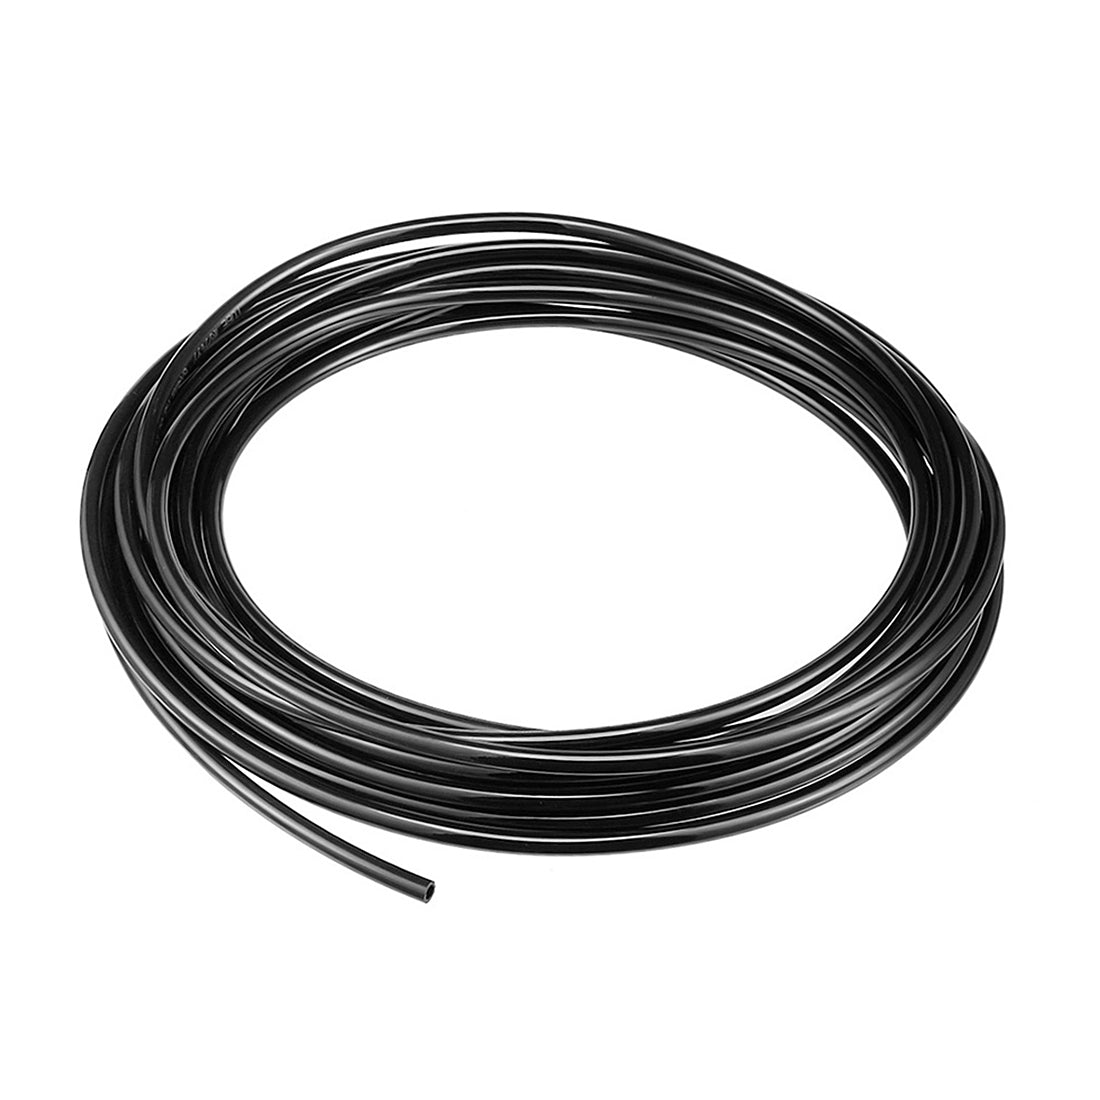 uxcell Uxcell 4mm X 2.5mm Pneumatic Air PU Hose Pipe Tube 5 Meter 16.4ft Black